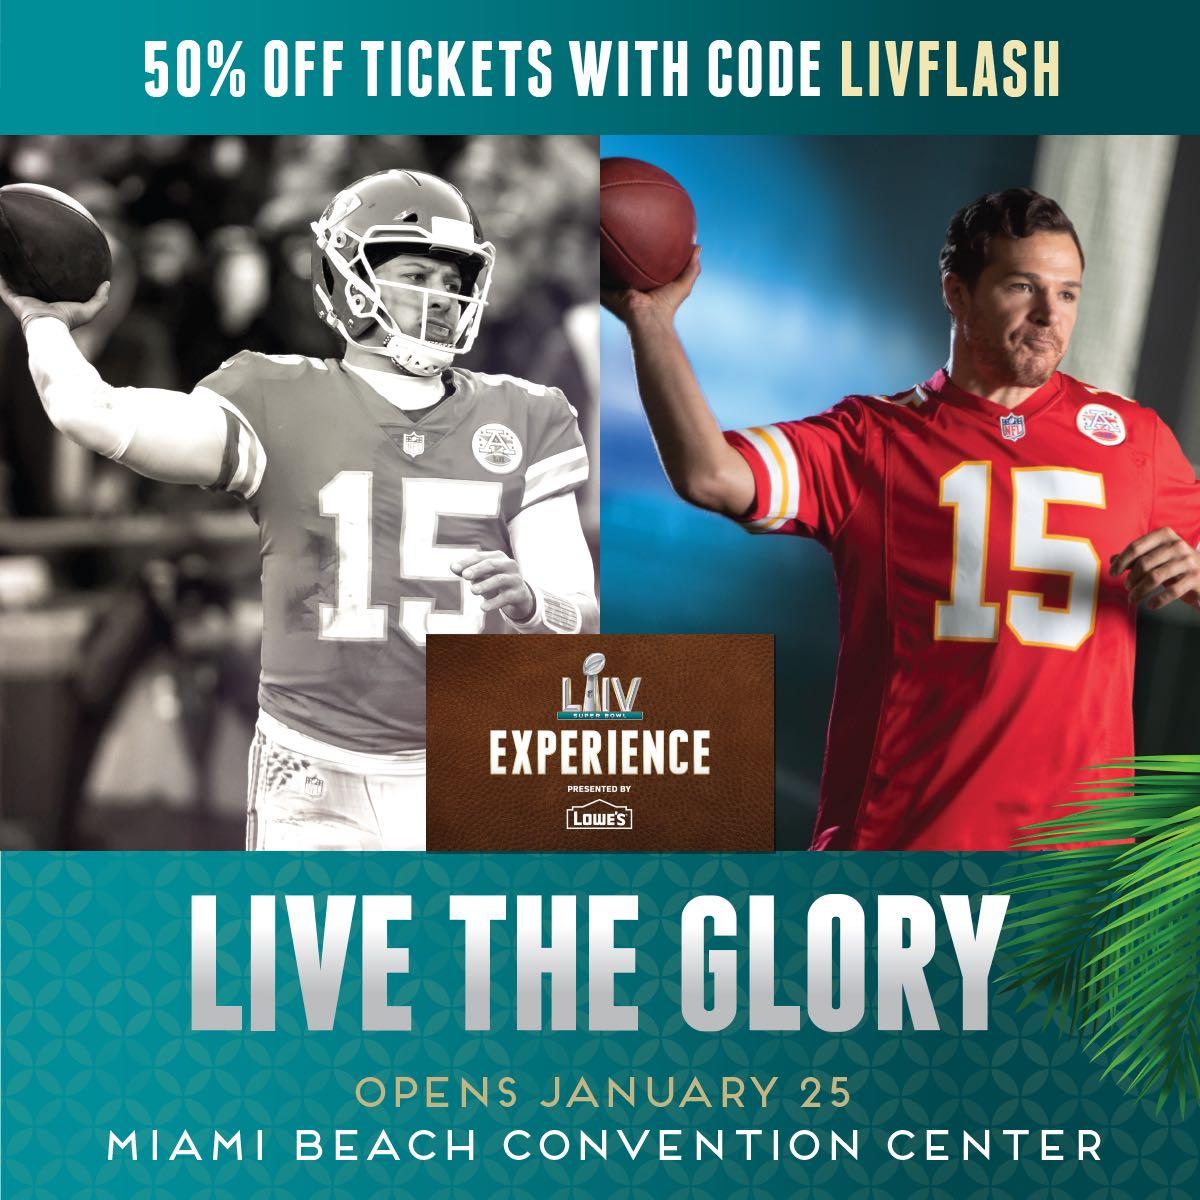 NFL on X: 'FLASH SALE! Get 50% off tickets with code LIVFLASH to